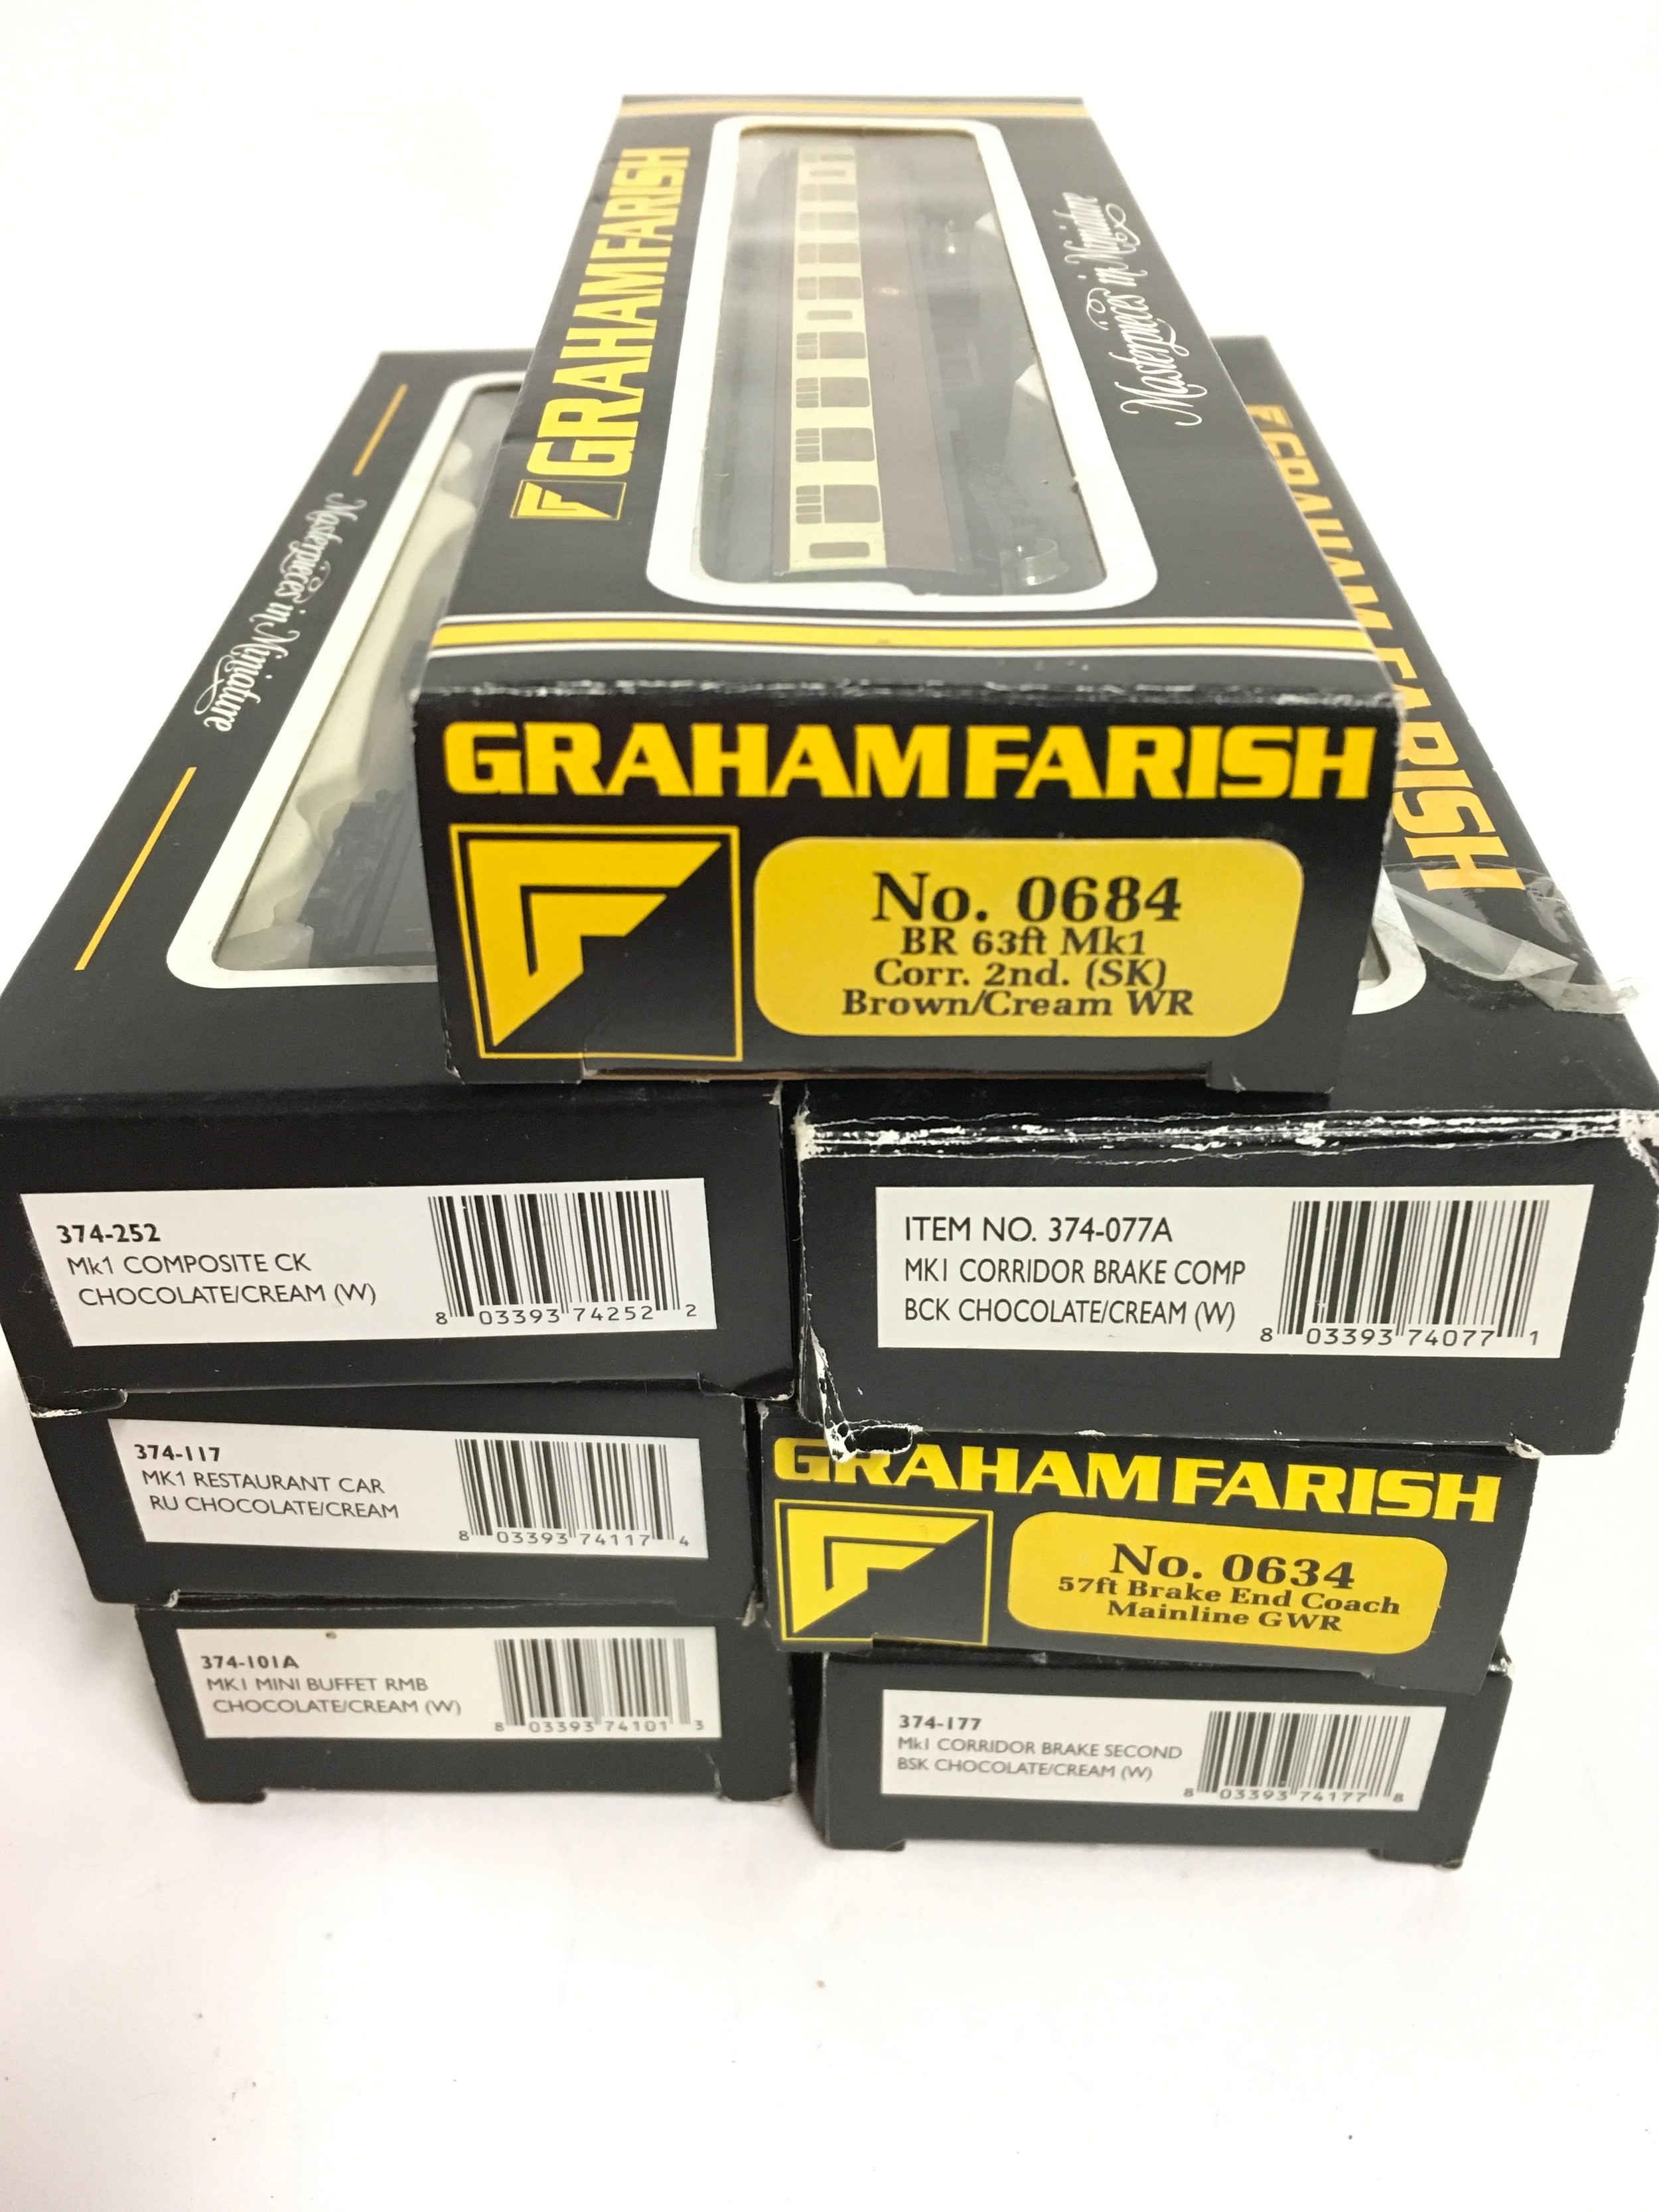 7 x assorted Graham Farish N Gauge Chocolate and Cream coaches, boxed. - Image 2 of 2